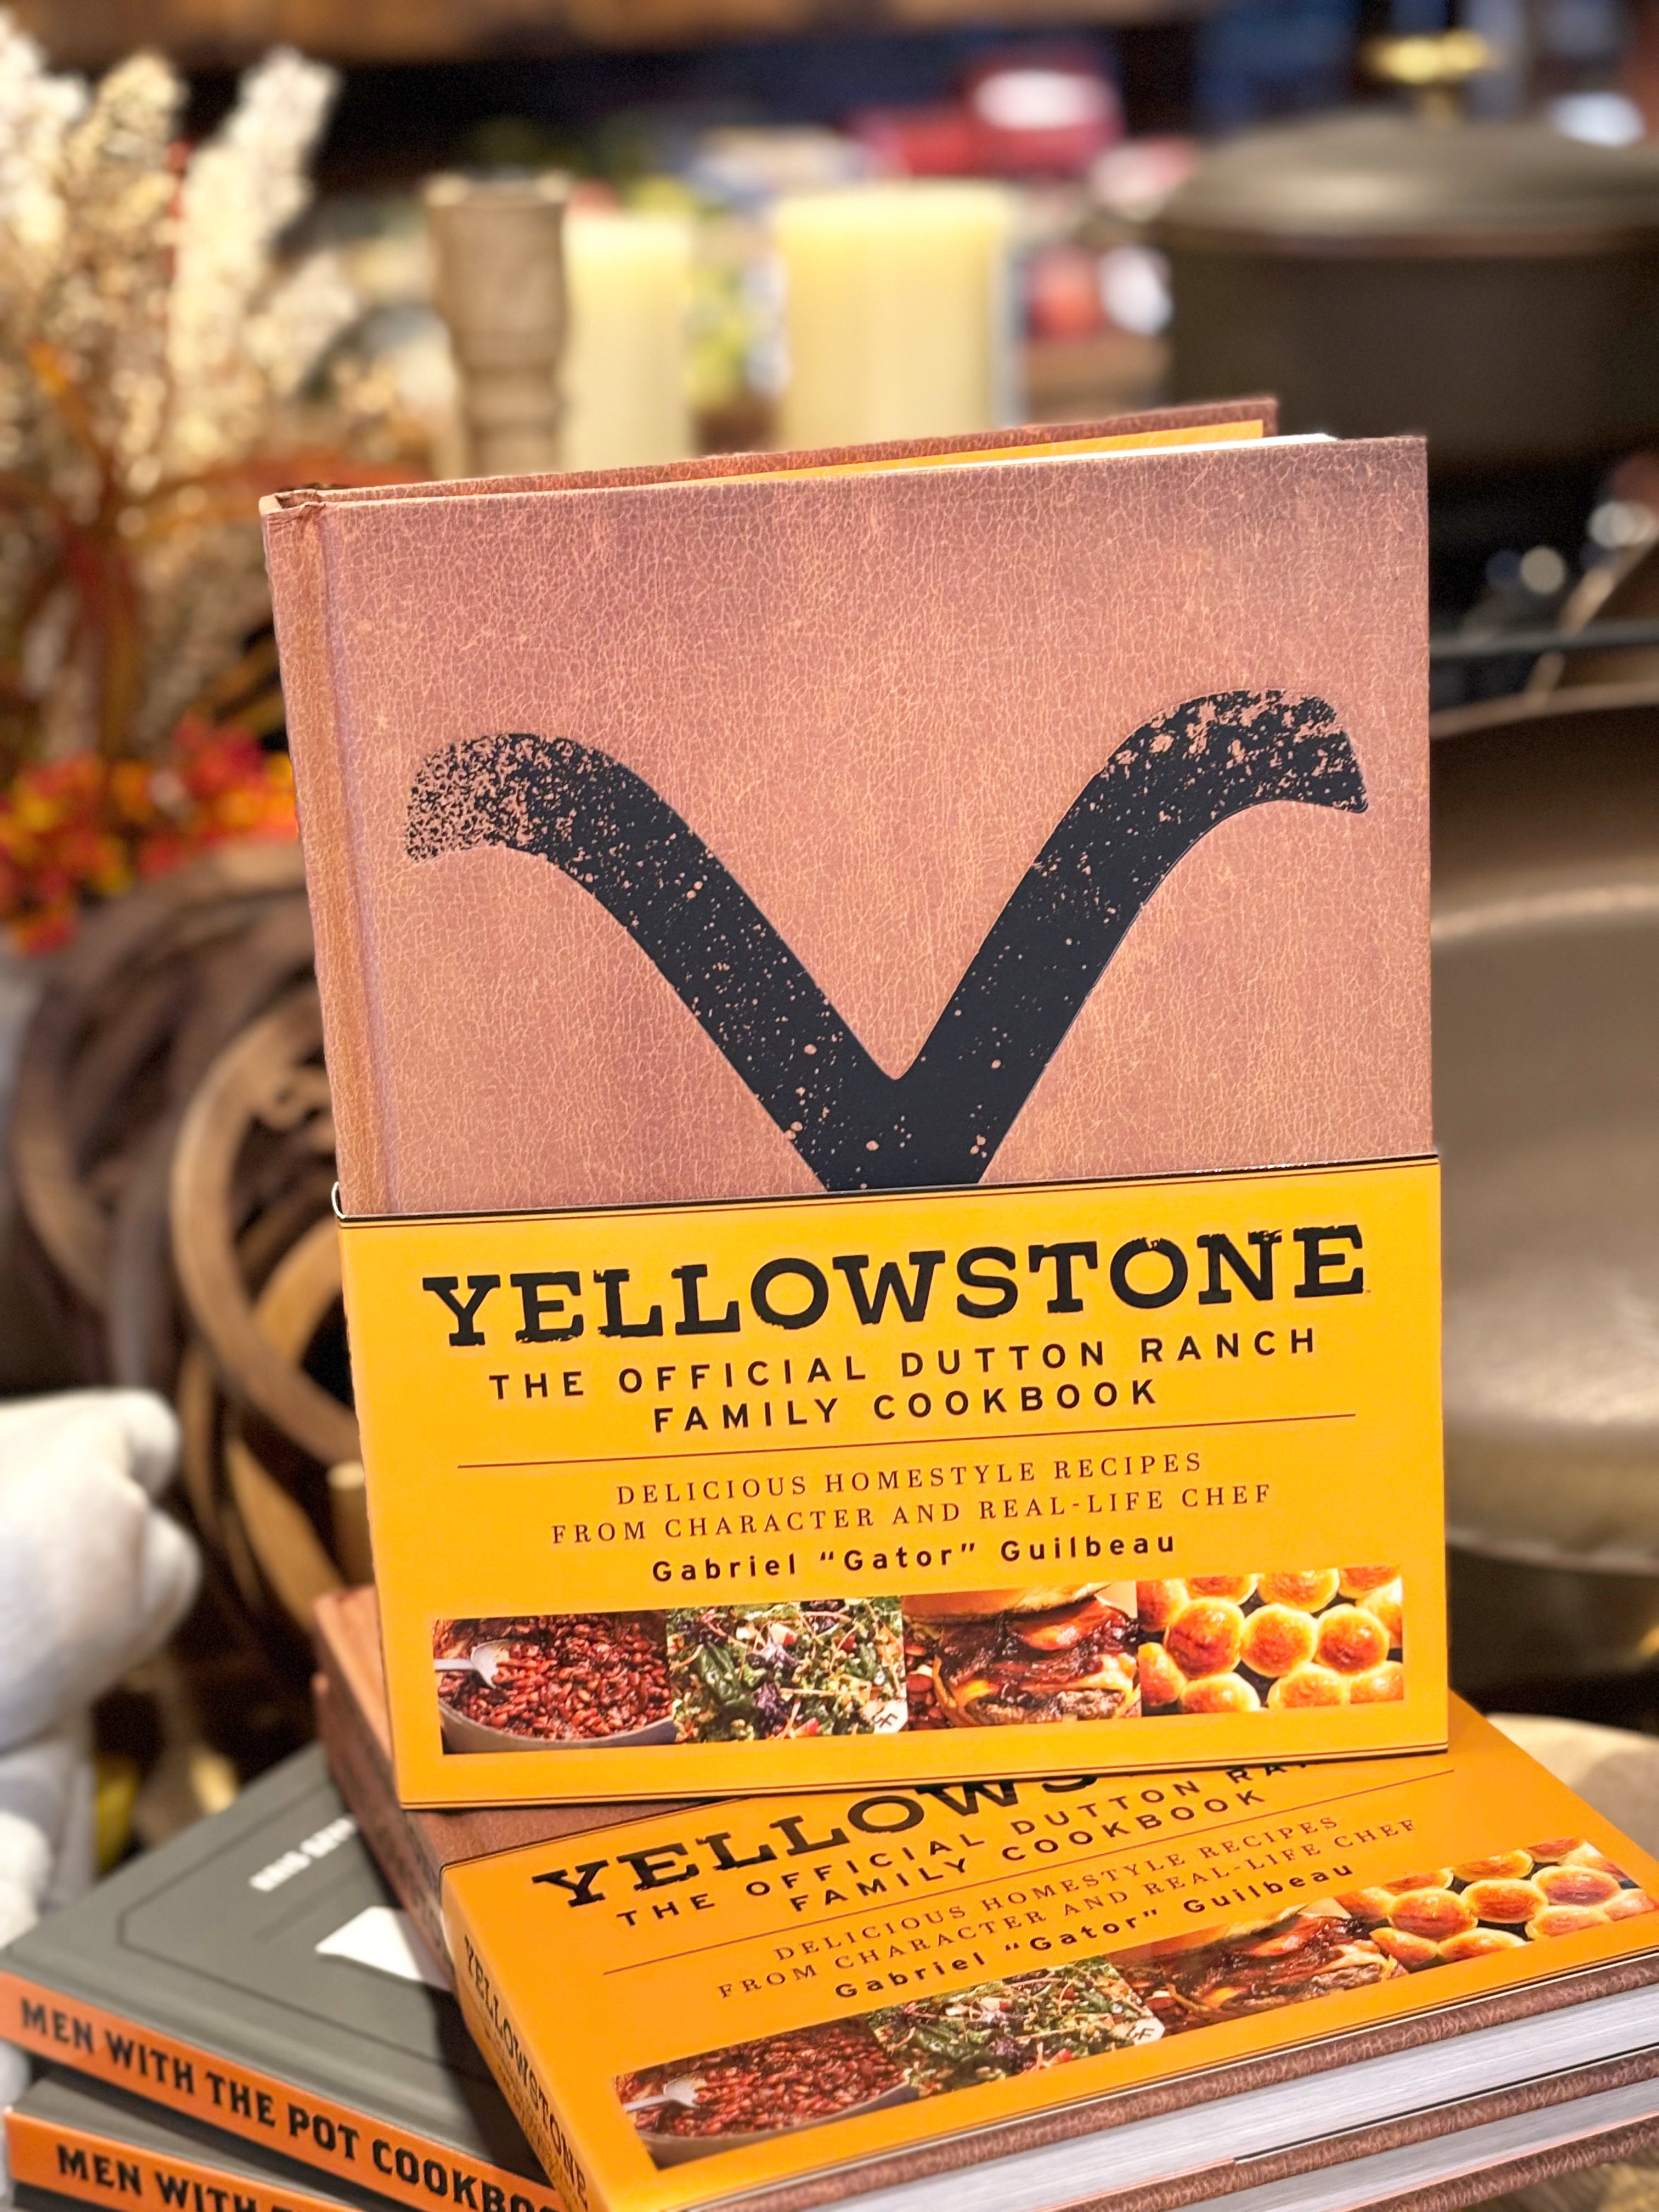 Yellowstone: The Official Dutton Ranch Family Cookbook: Delicious